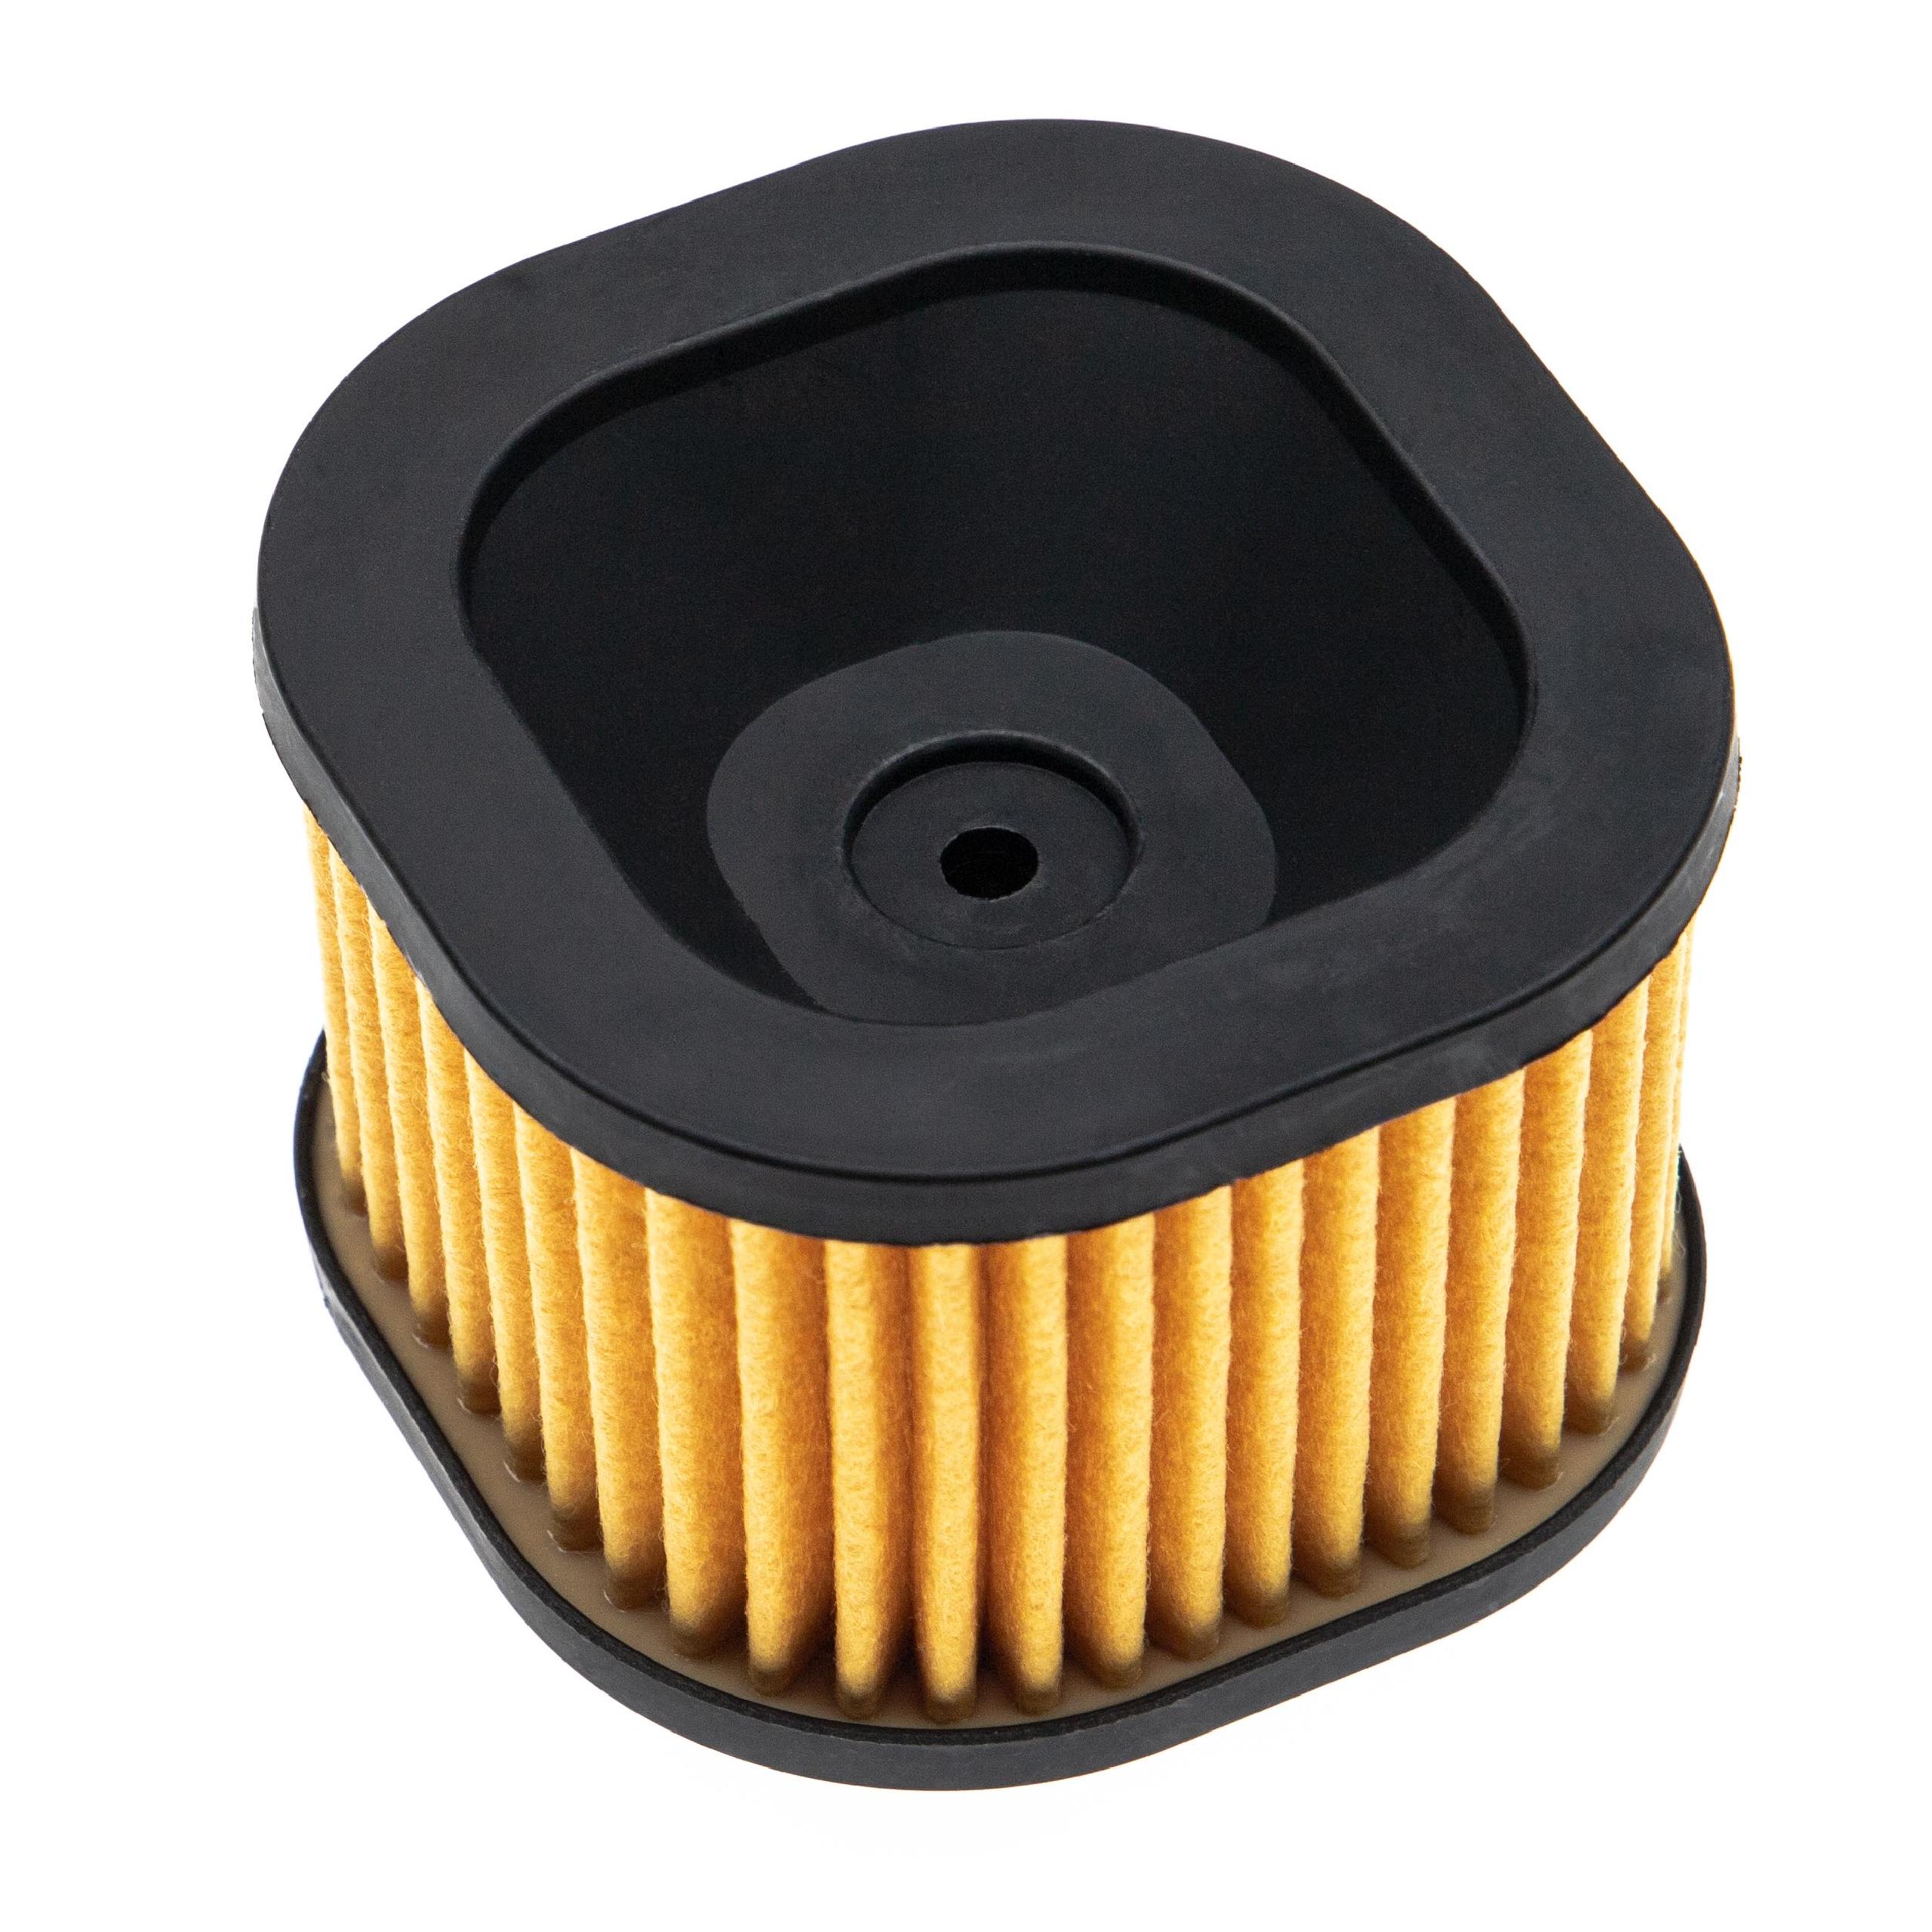 Filter replaces Husqvarna 503 81 80-01, 503818001, 503818004, 503 81 80-04 for Power Saw - air filter